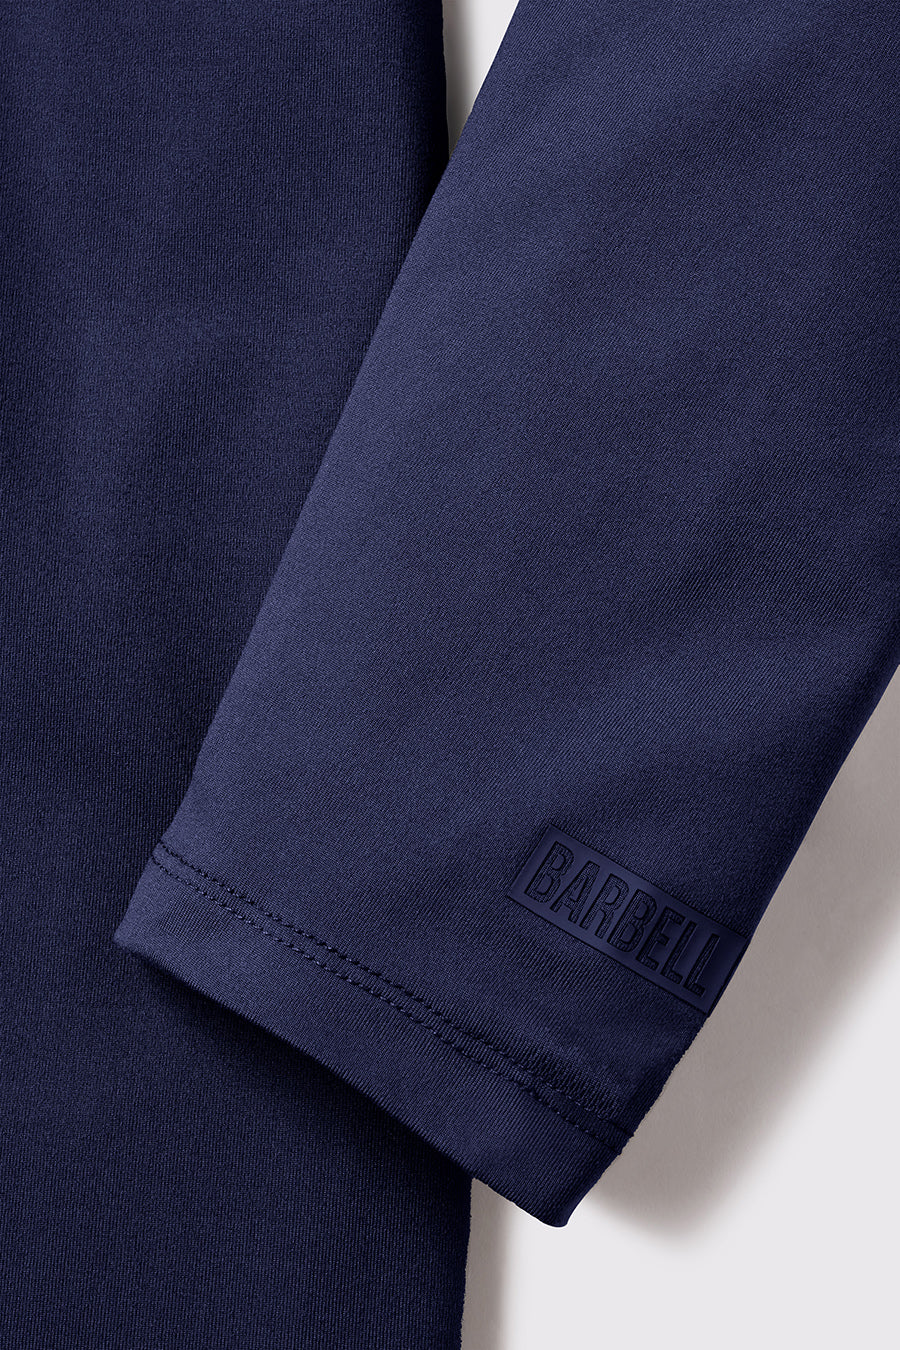 Havok Long Sleeve - Cadet - photo from cuff detail #color_cadet